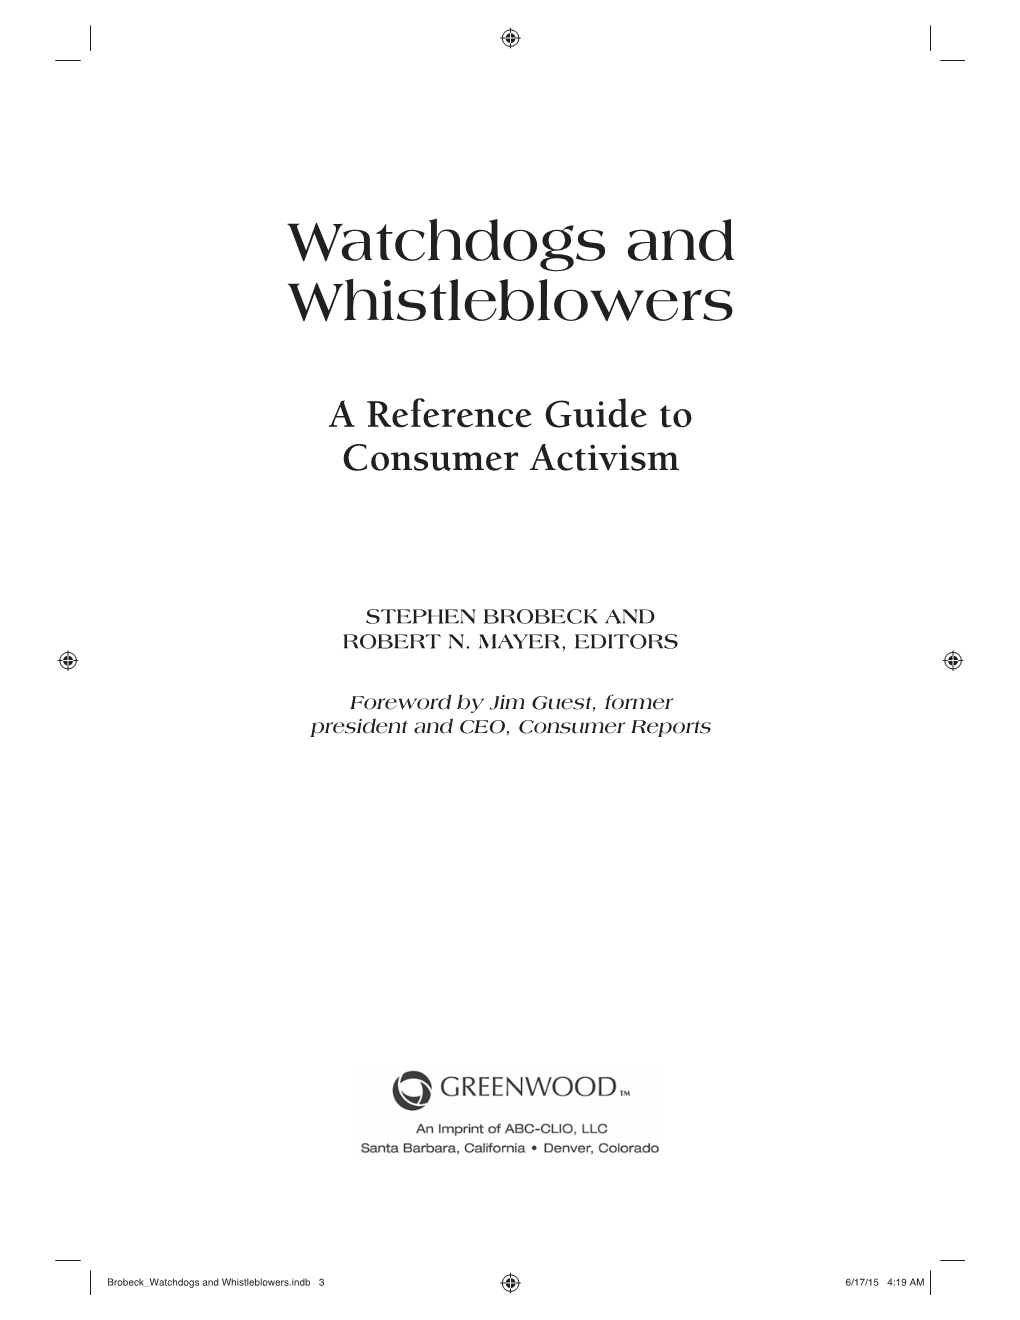 Watchdogs and Whistleblowers